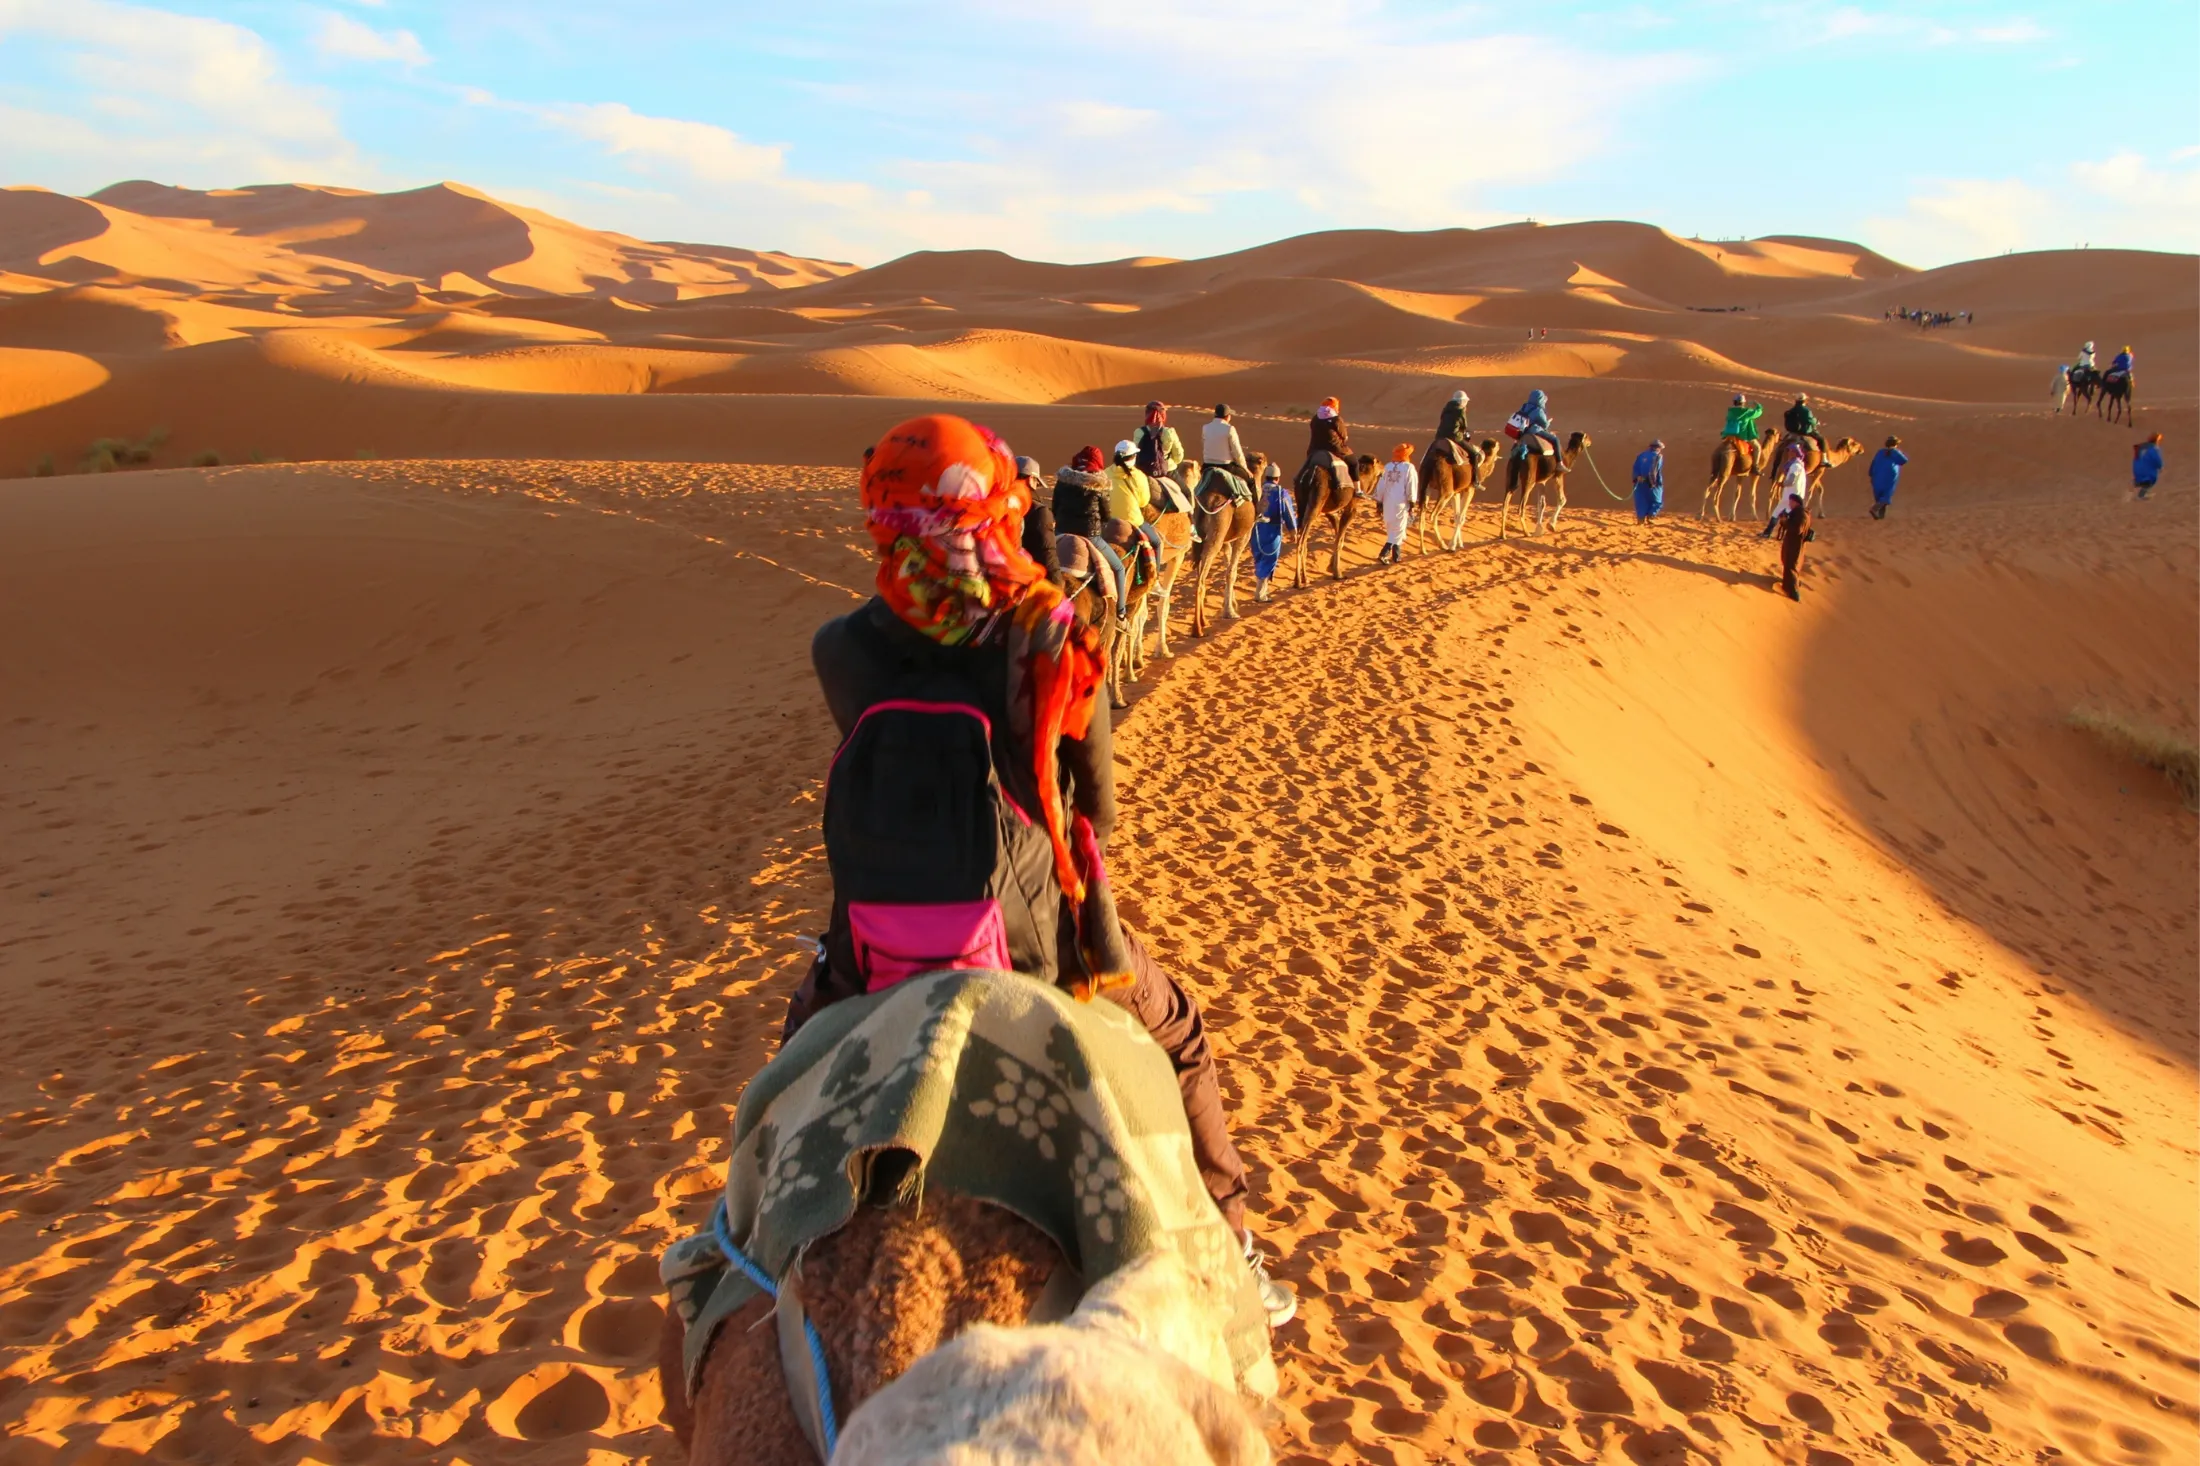 Tourists on Camels in the Morocco Desert